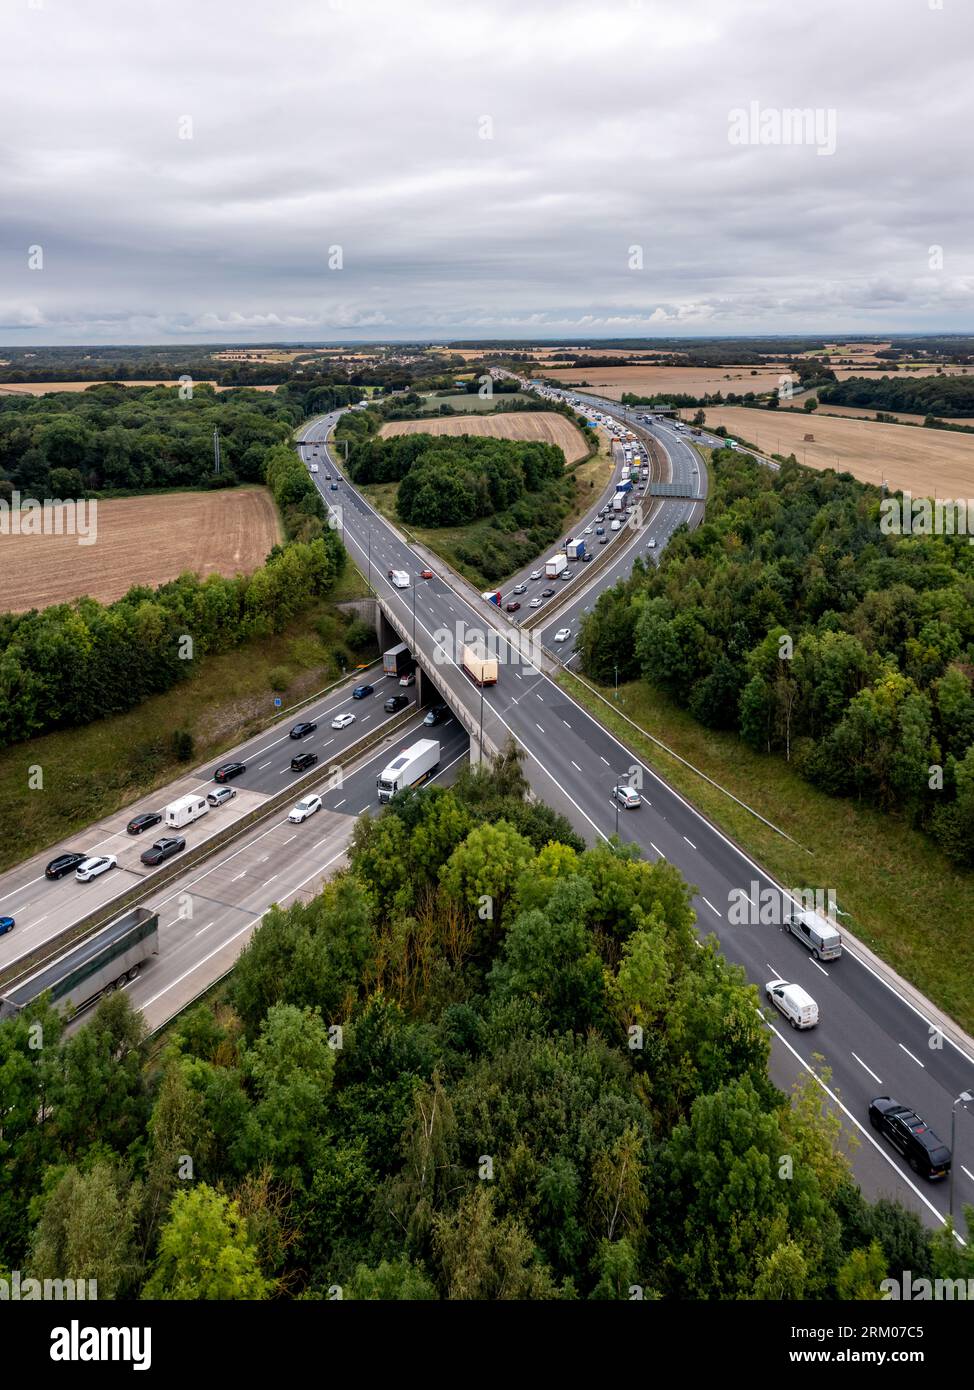 Aerial vertorama landscape of a busy stretch of the M1 motorway at a junction with traffic queuing and merging onto the main carriageway Stock Photo